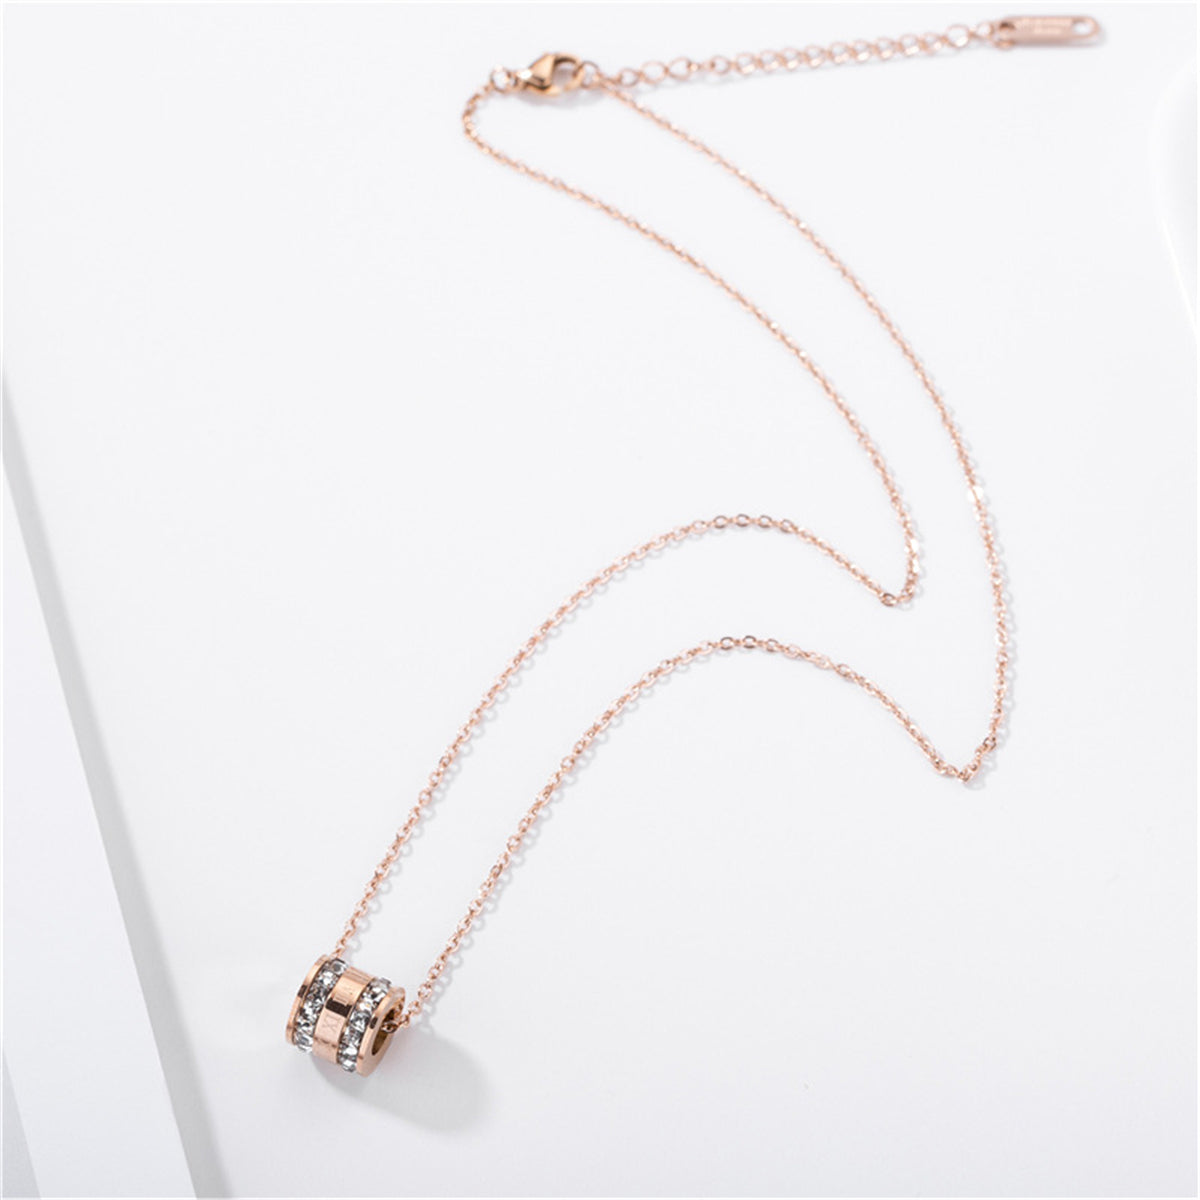 Crystal & 18K Rose Gold-Plated Roman Numeral Pendant Necklace